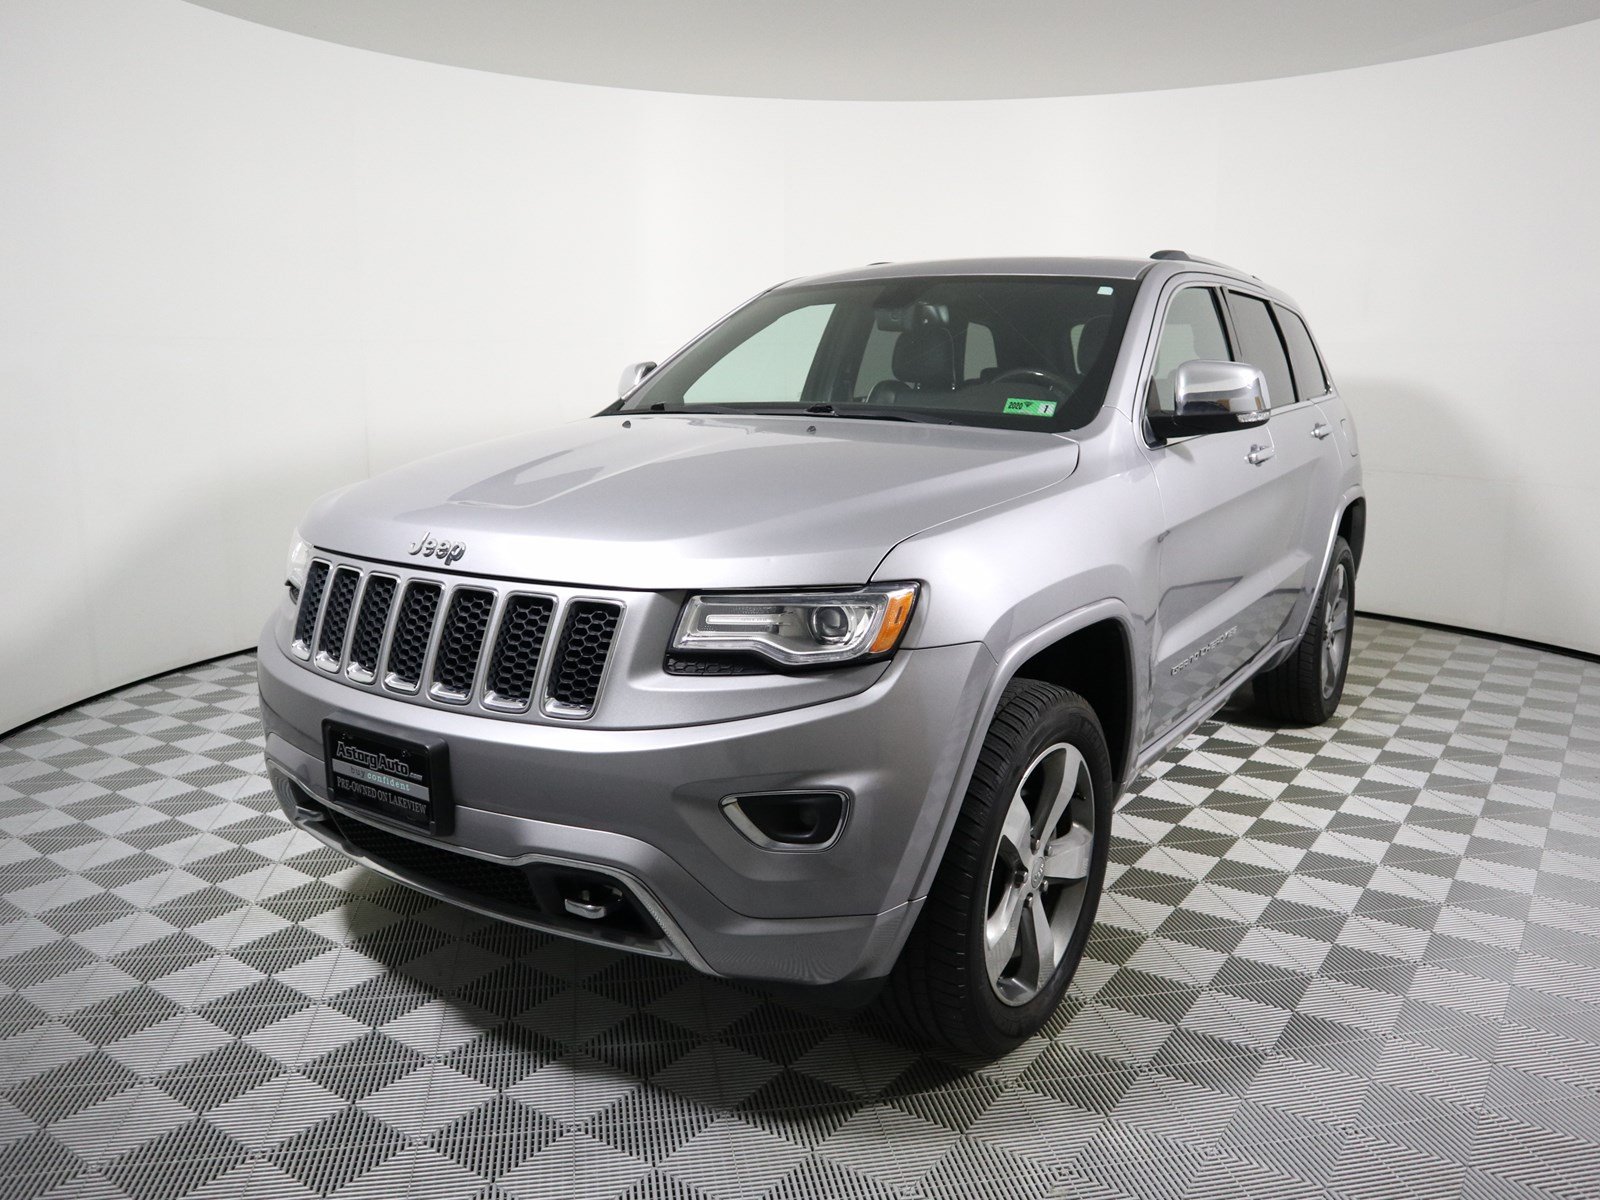 PreOwned 2015 Jeep Grand Cherokee Overland Sport Utility